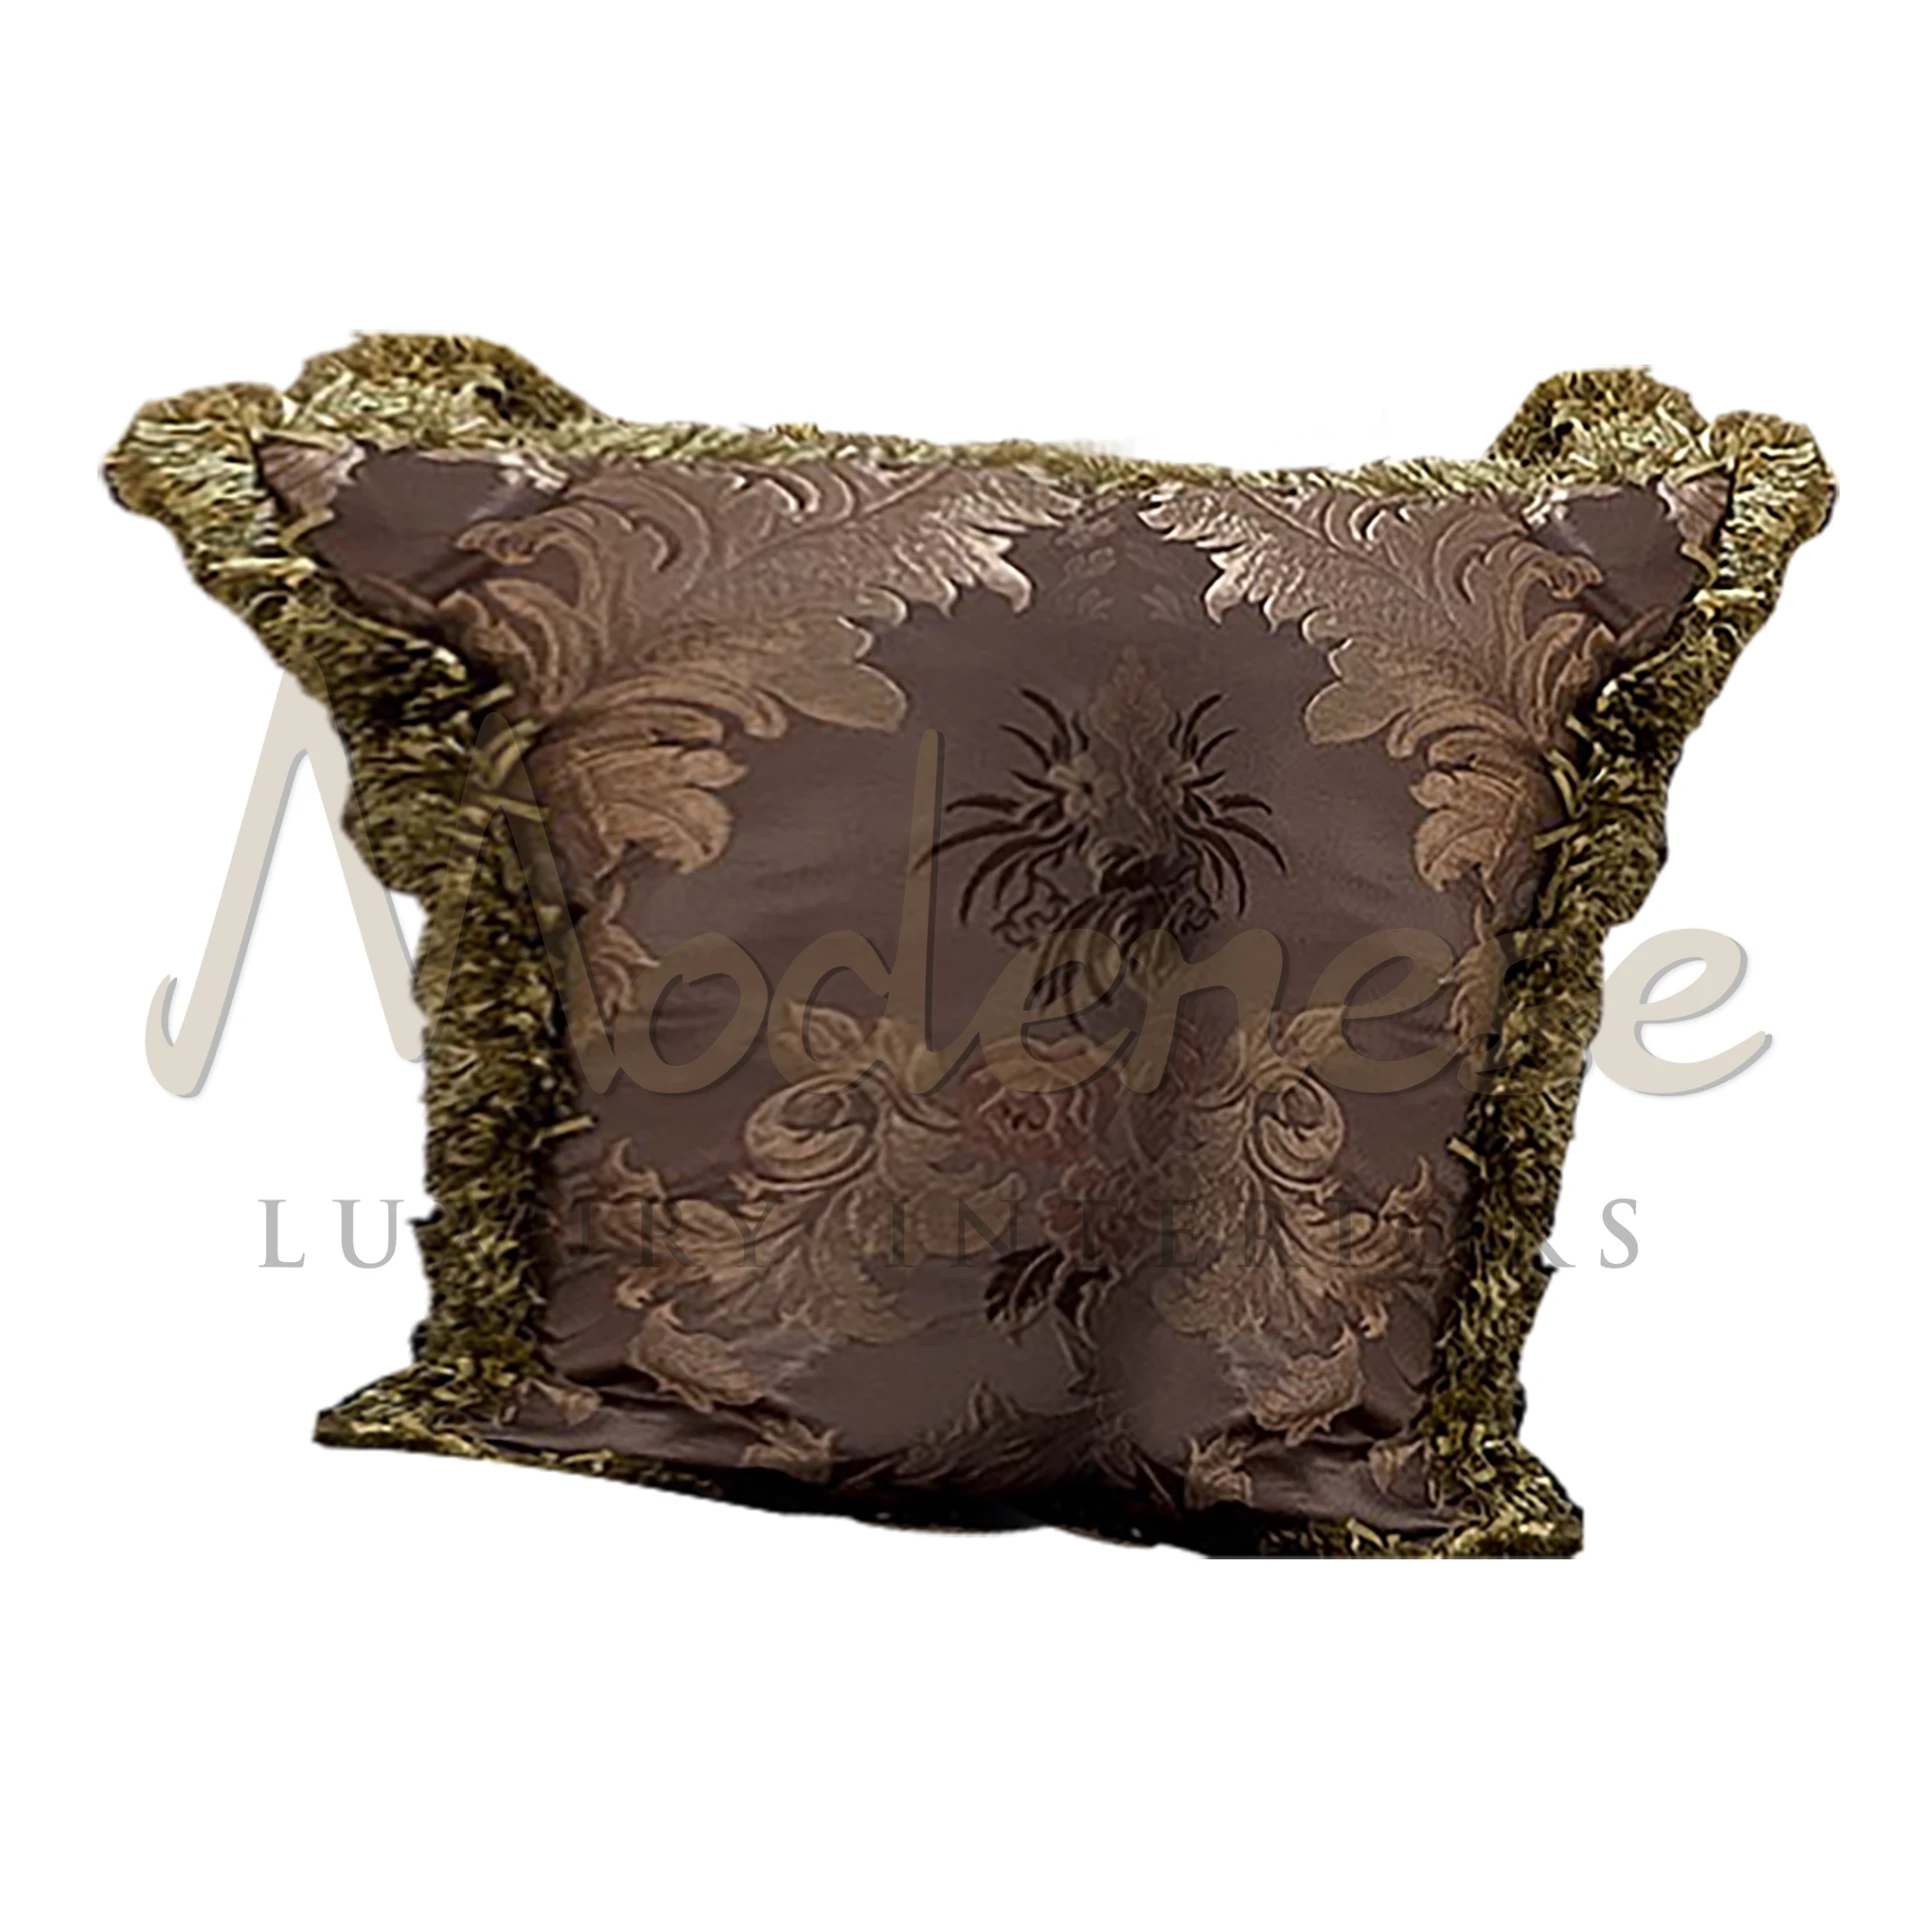 Baroque Elegant Pillow by Modenese: a symbol of luxury and sophistication, with exquisite attention to detail and design.